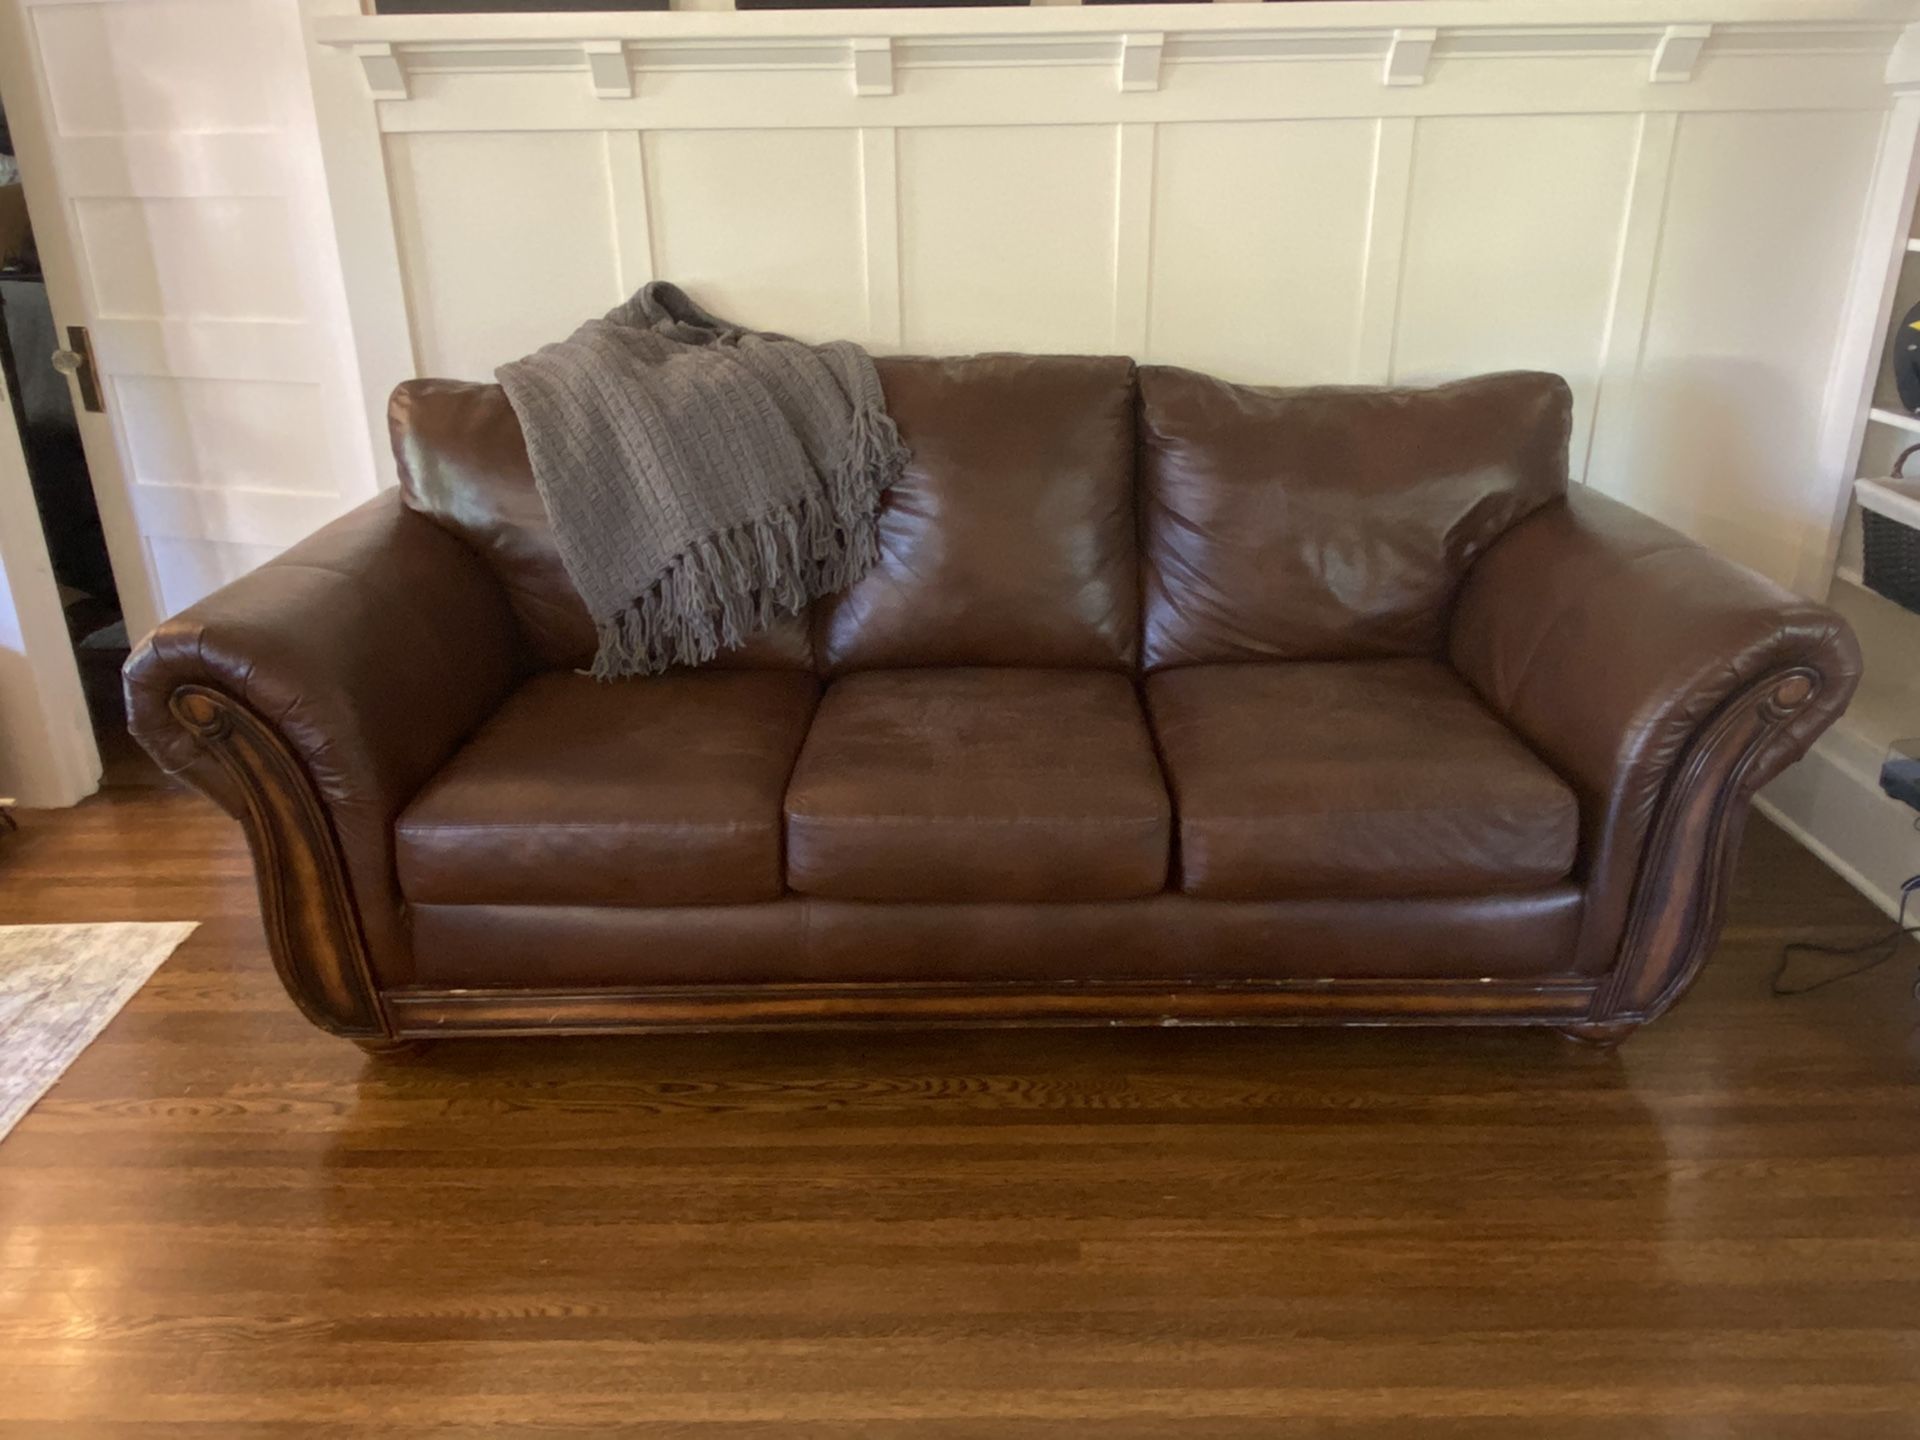 Leather sofa available for free. Slightly worn but still a comfortable seat! Yours if you come and get it!